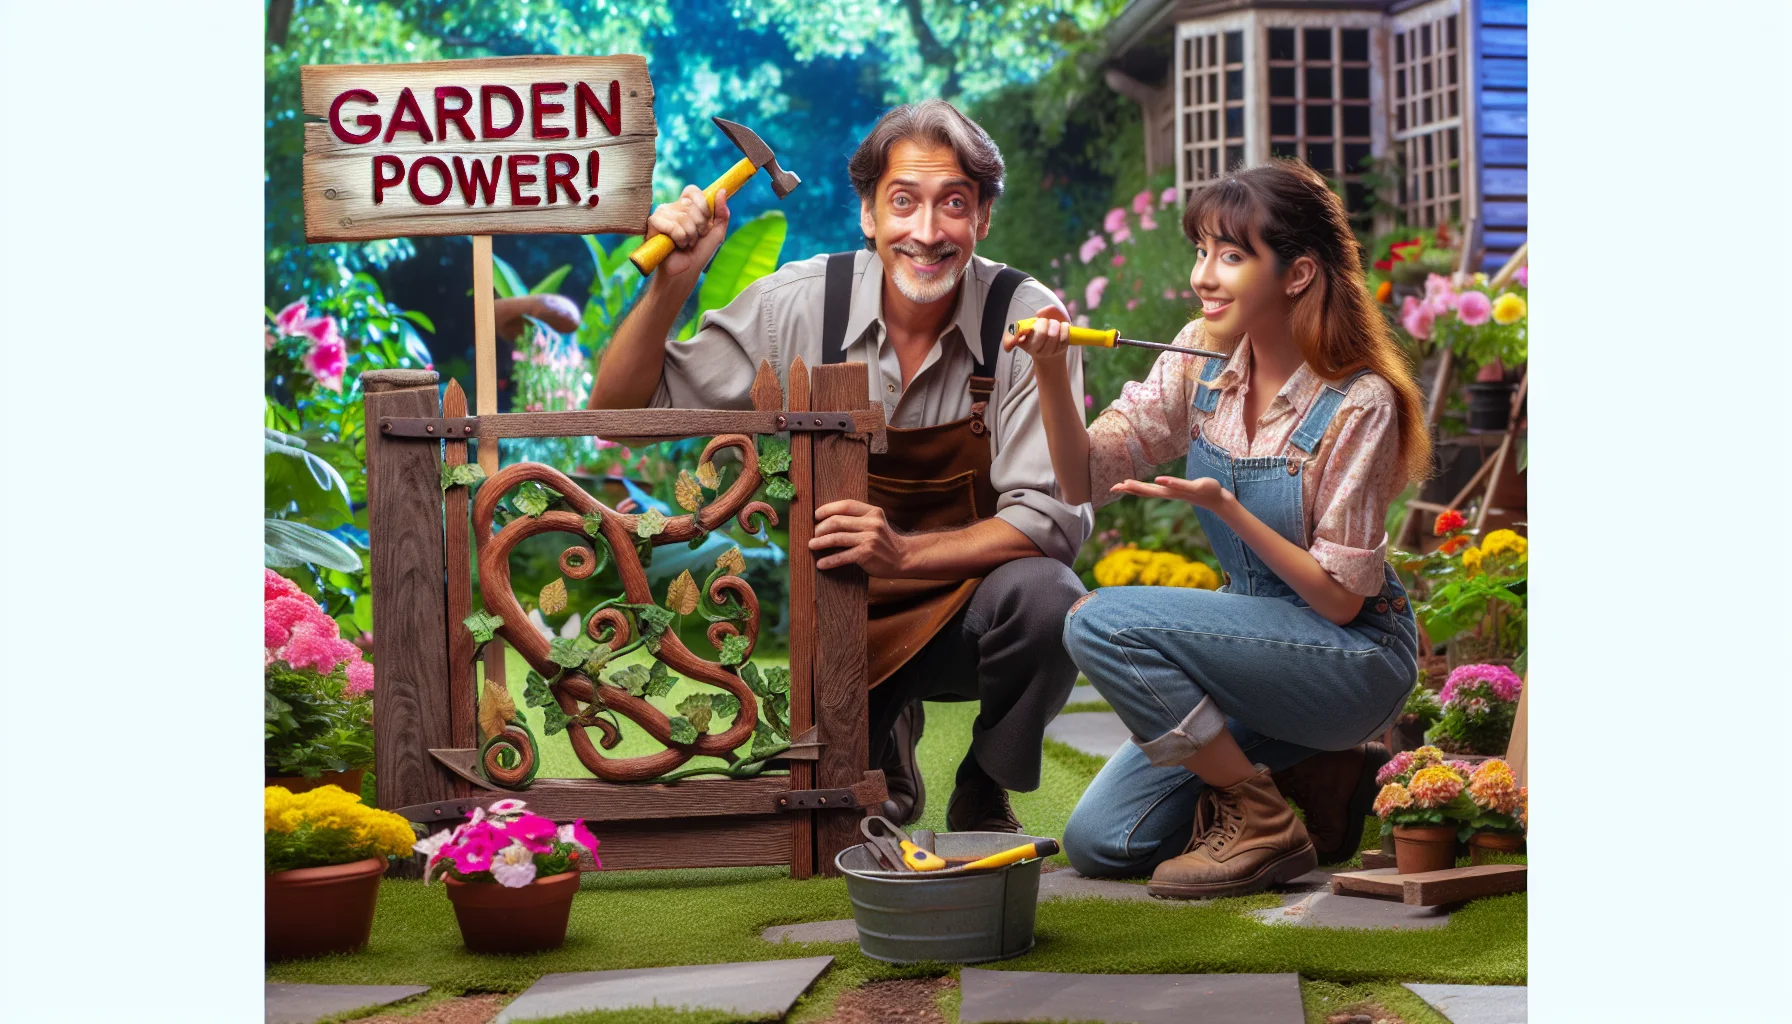 Create an amusing scene showcasing a middle-aged Caucasian man and a young Hispanic woman engaging in gardening activities. The man is enthusiastically crafting a charming wooden garden gate, complete with intricate vine-like carvings and a vintage rusted handle, using traditional woodworking tools. The woman is encouraging the man by cheering him on, holding a colorful sign that humorously says 'Garden Power!'. Surrounding them is a vibrant garden filled with blooming flowers and lush greenery. The scenario should not only focus on the crafting of the wooden gate but also emphasize the joy of gardening in a light-hearted manner.